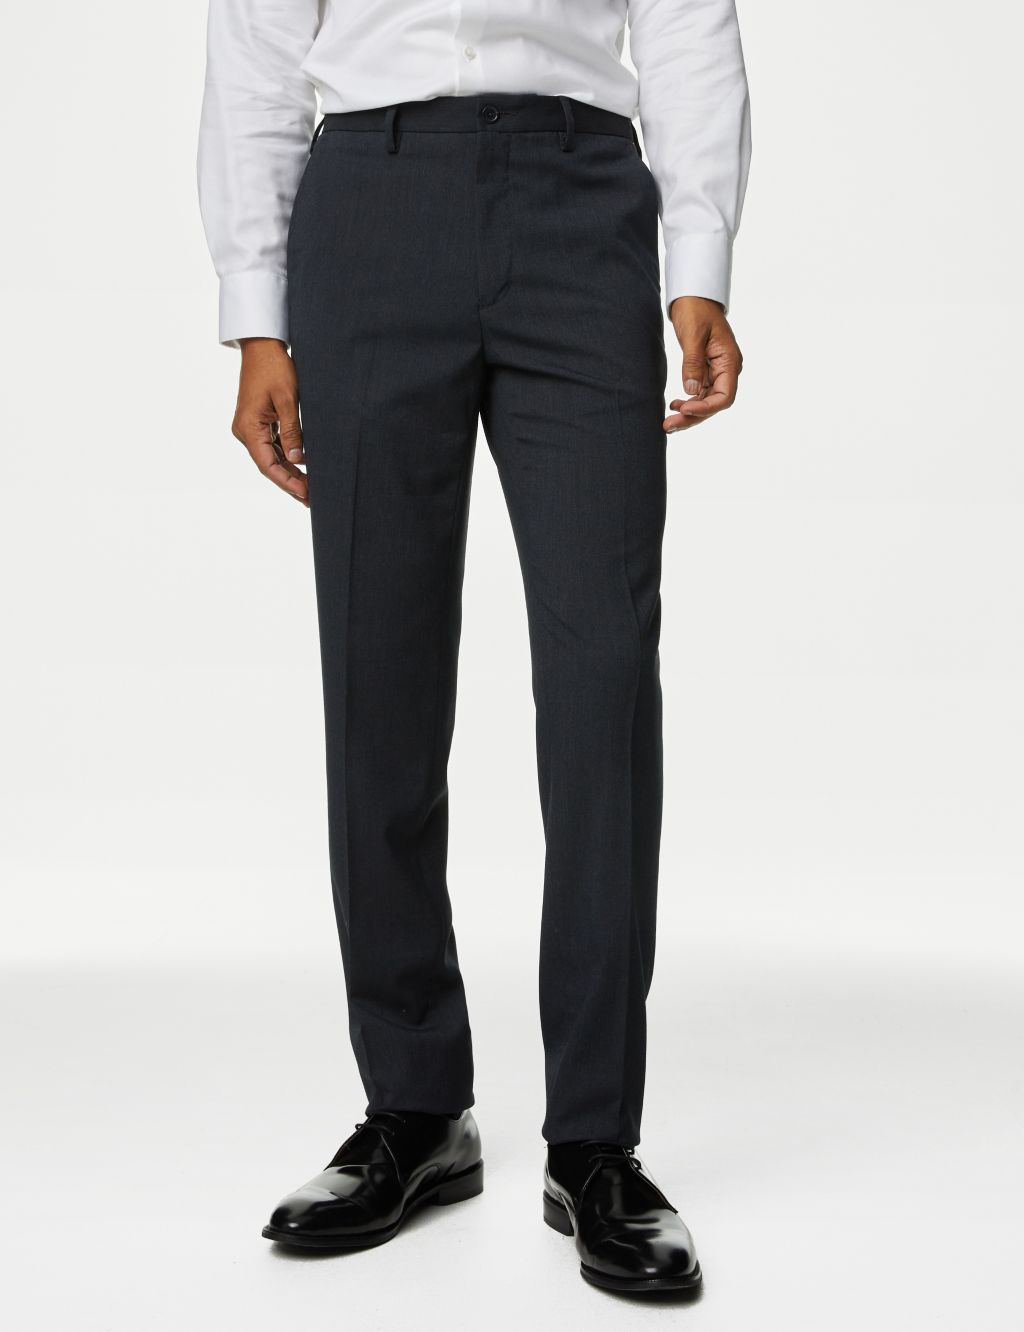 Slim Fit Flat Front Stretch Trousers image 3